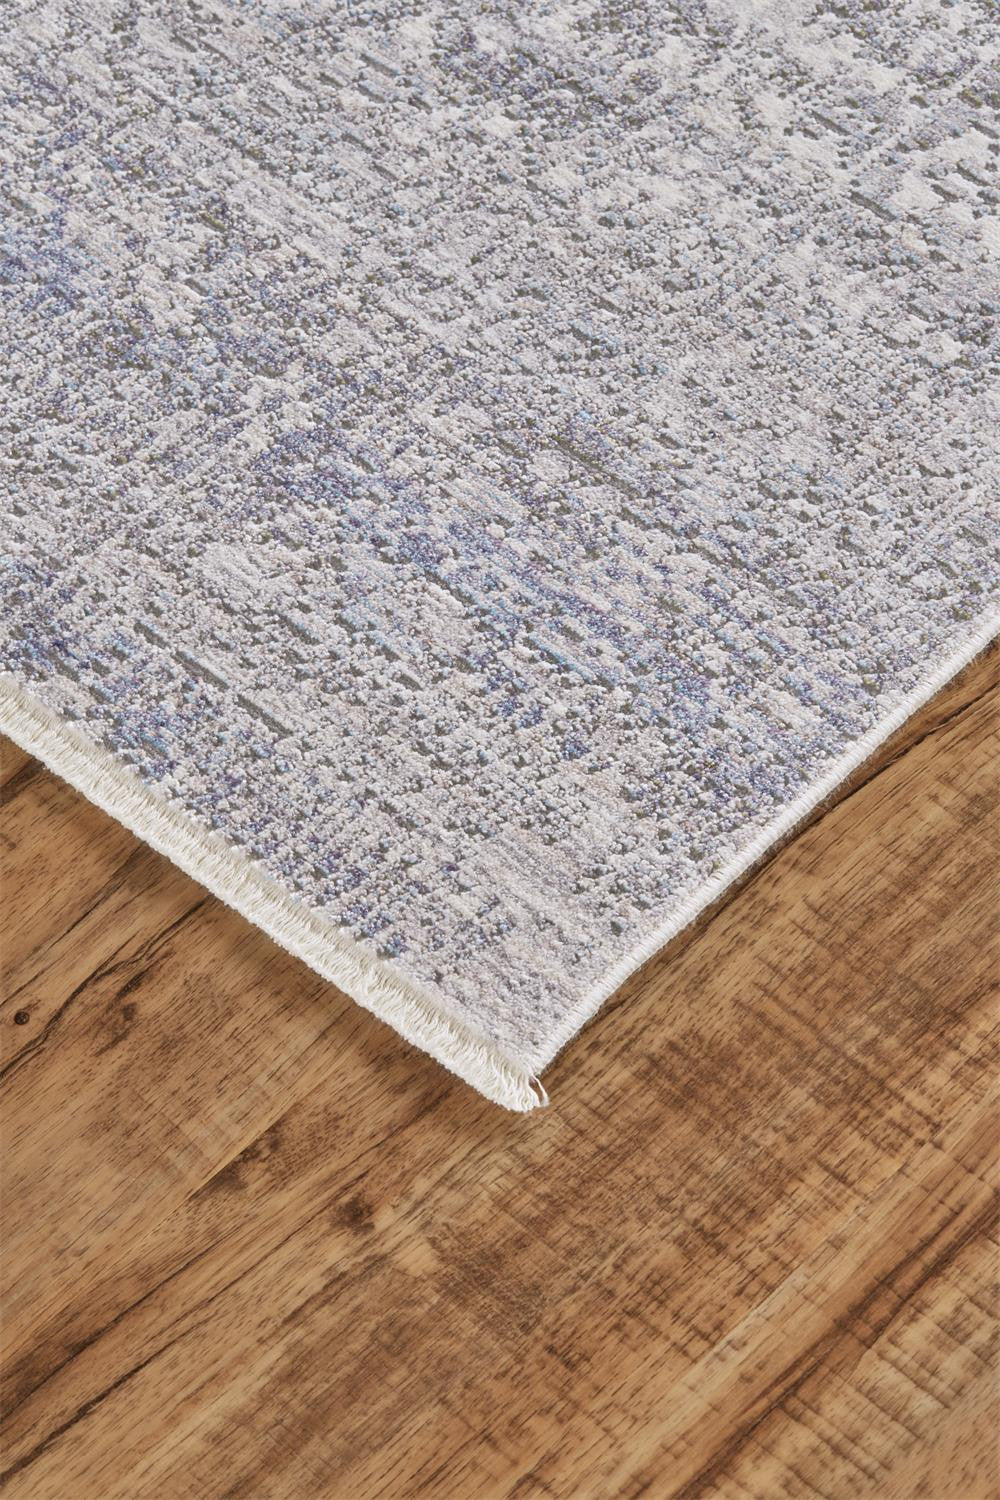 8' X 10' Gray Ivory And Taupe Abstract Distressed Area Rug With Fringe